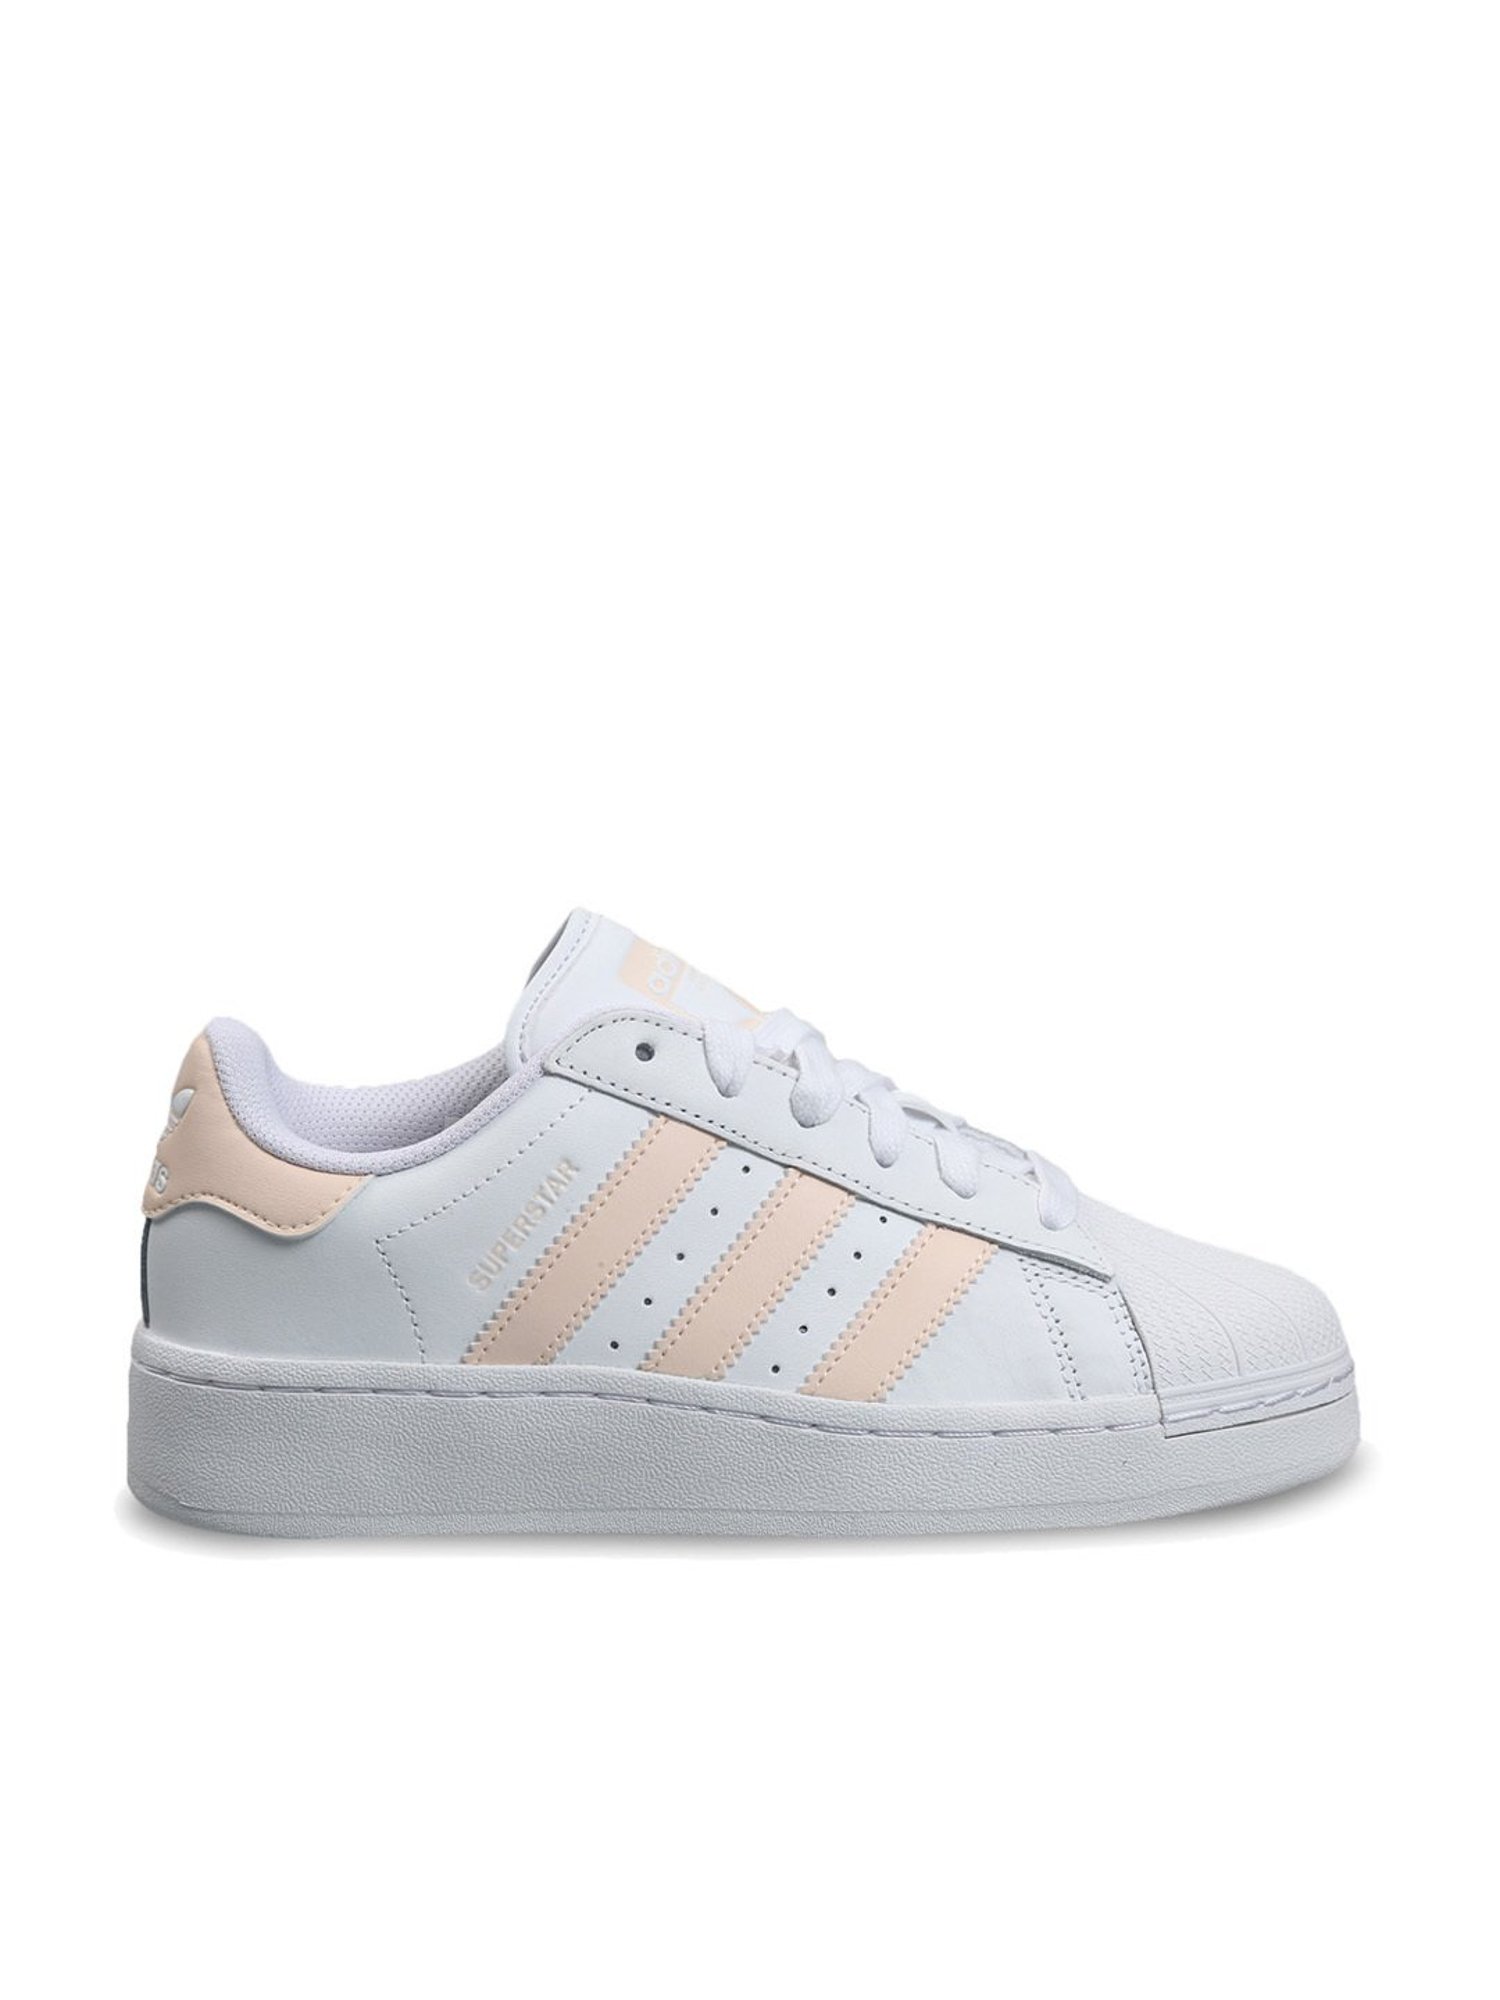 Buy Adidas Originals Women's SUPERSTAR XLG White Casual Sneakers